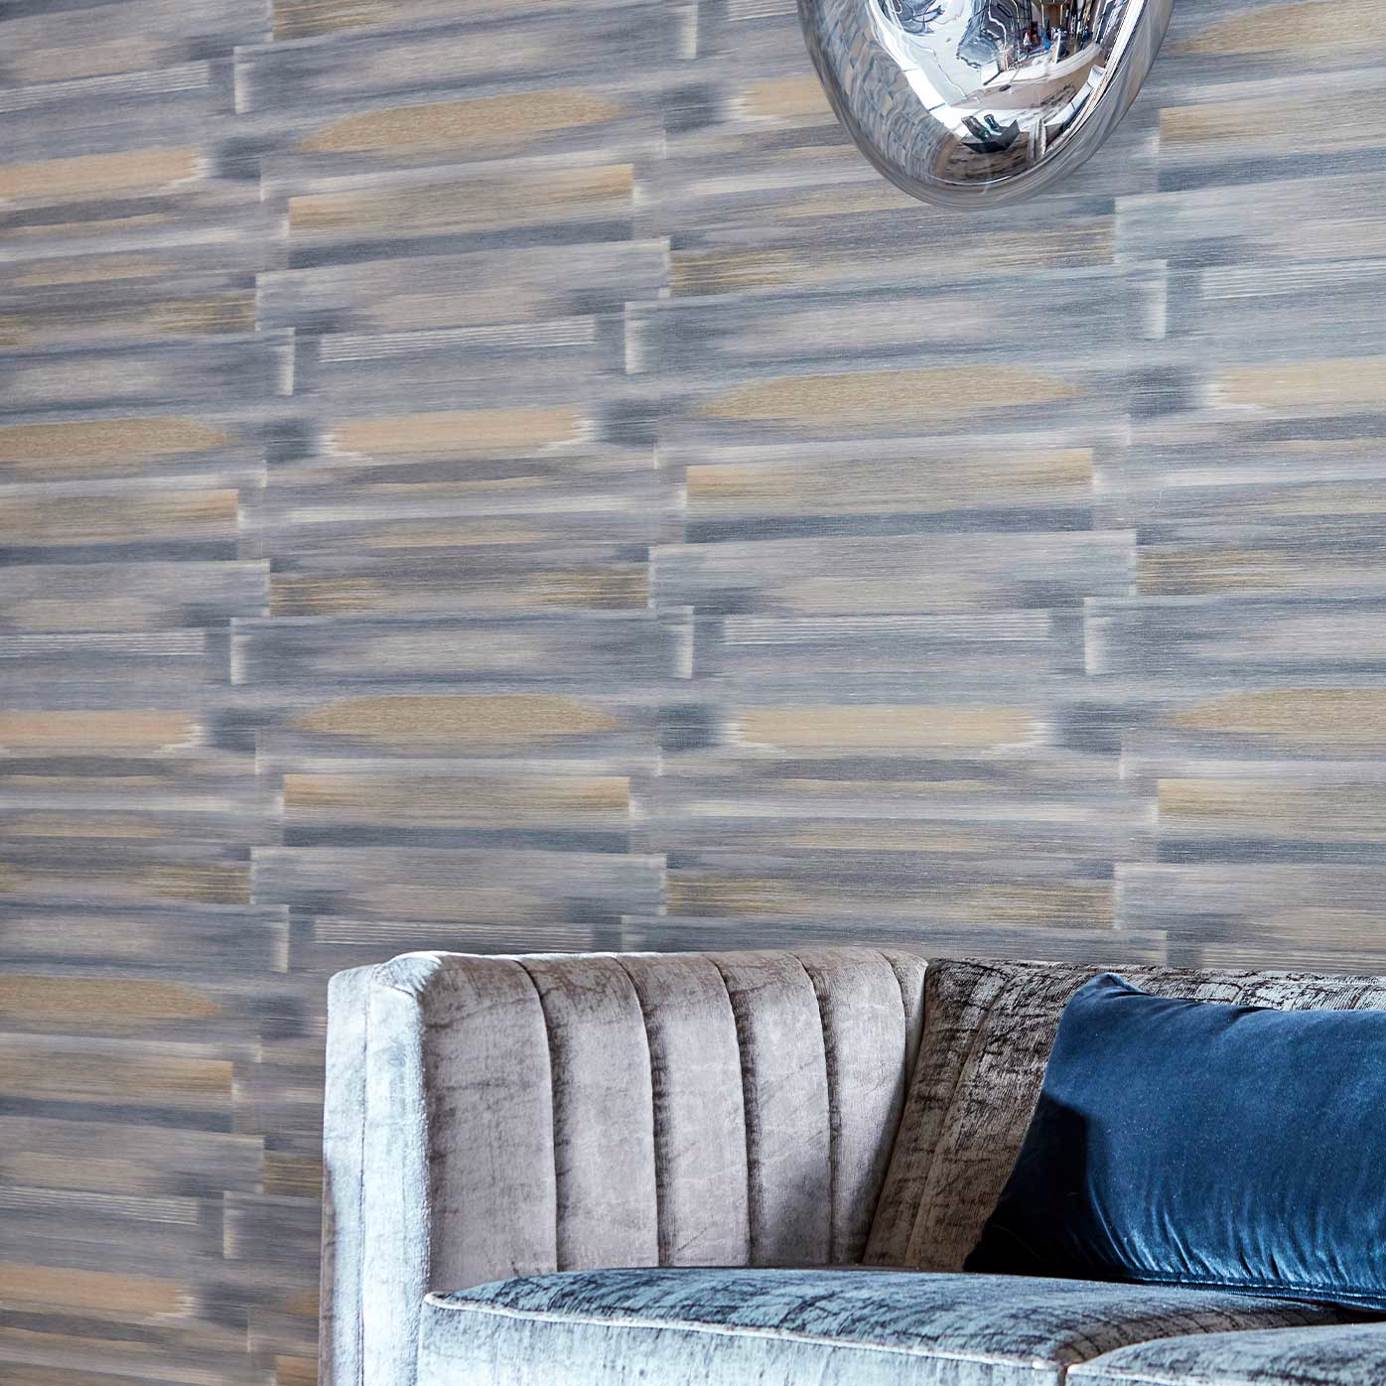 Anthology Refraction Pebble/Shell Wallpaper by HAR